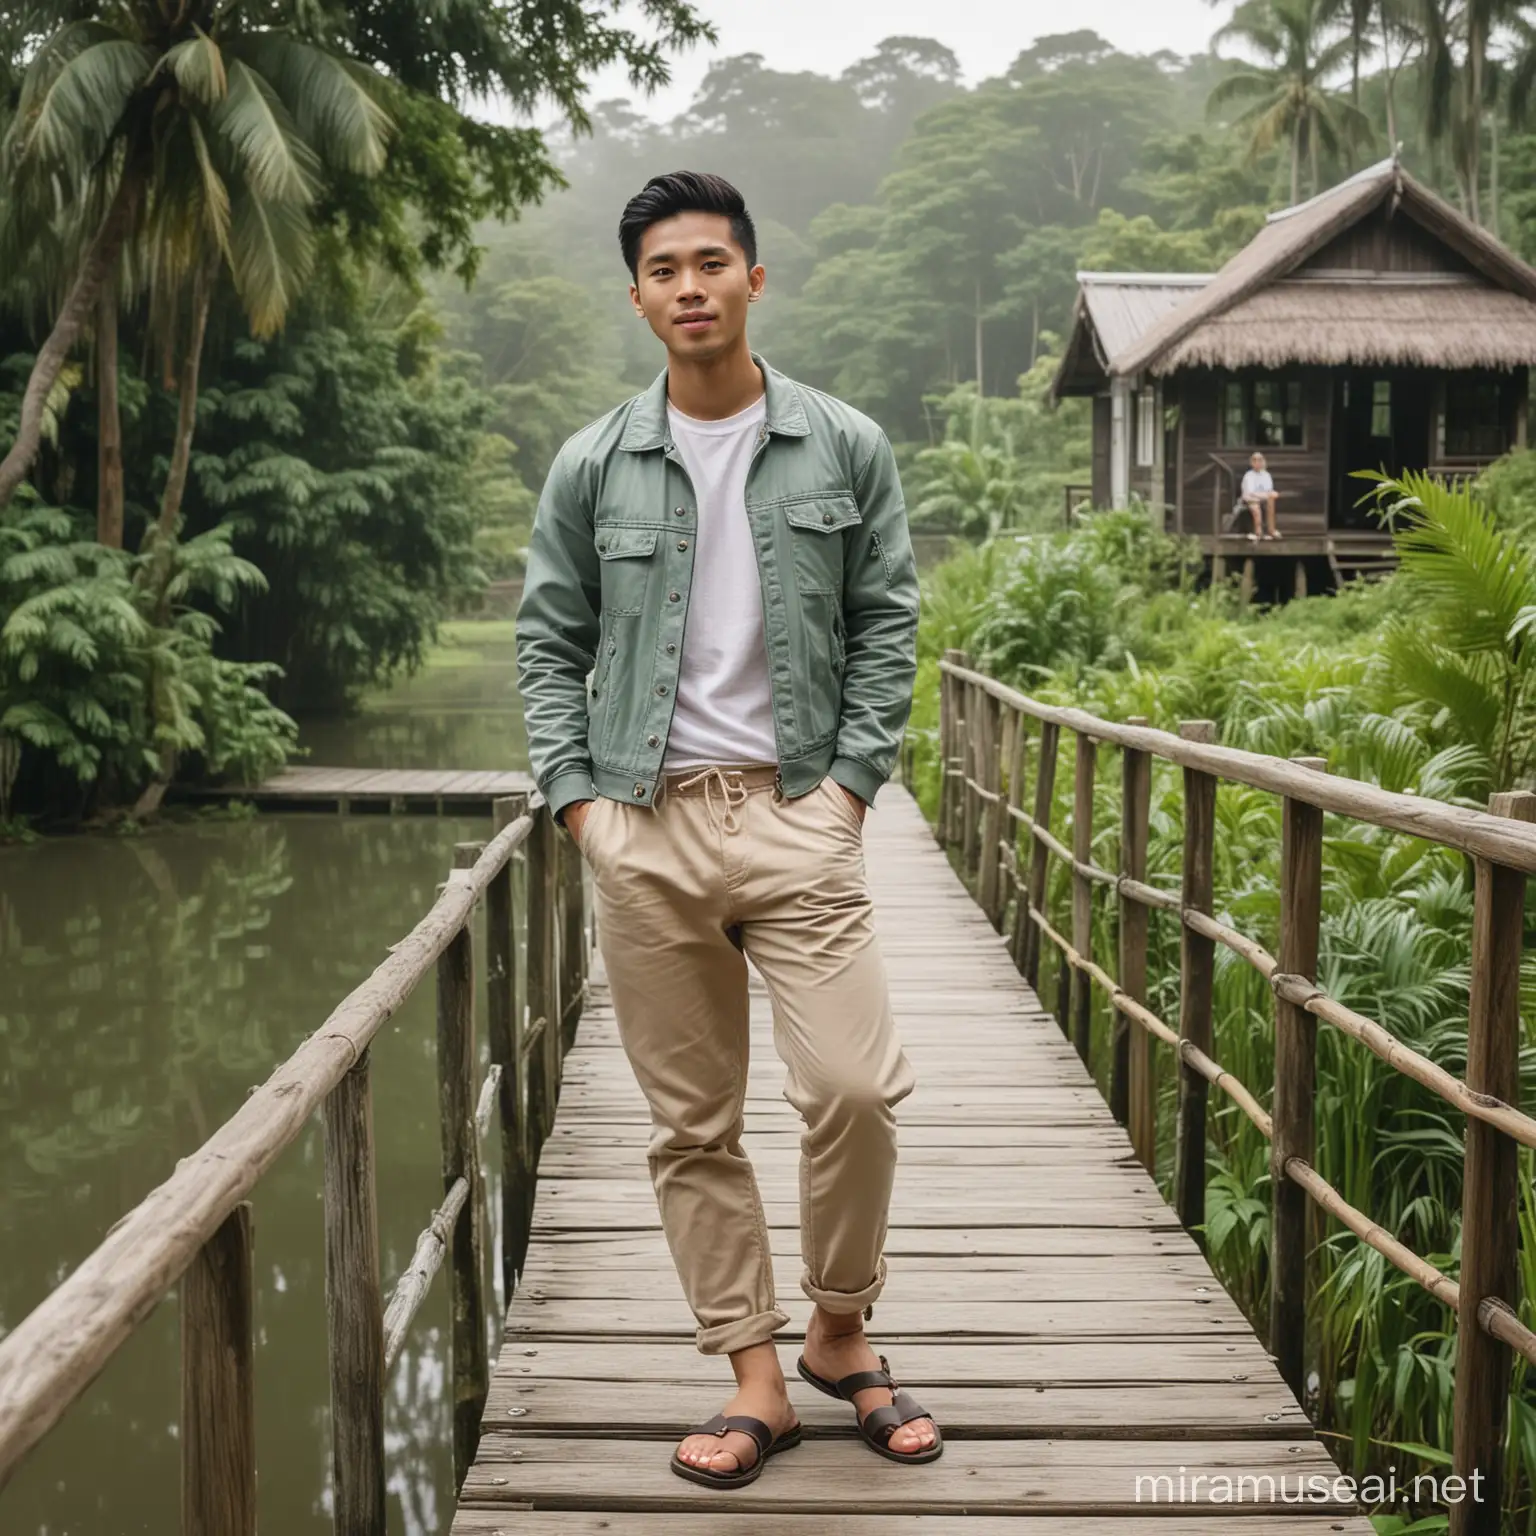 24 year old young Asian man, clear face, wearing jacket, beige pants, wearing sandals, standing with a beautiful woman with black hair on a bridge railing, the background is a wooden hut located in the middle of a lush tropical forest. The cottage stands on a pond with clear water, surrounded by large trees and green plants, bright foggy weather during the day.